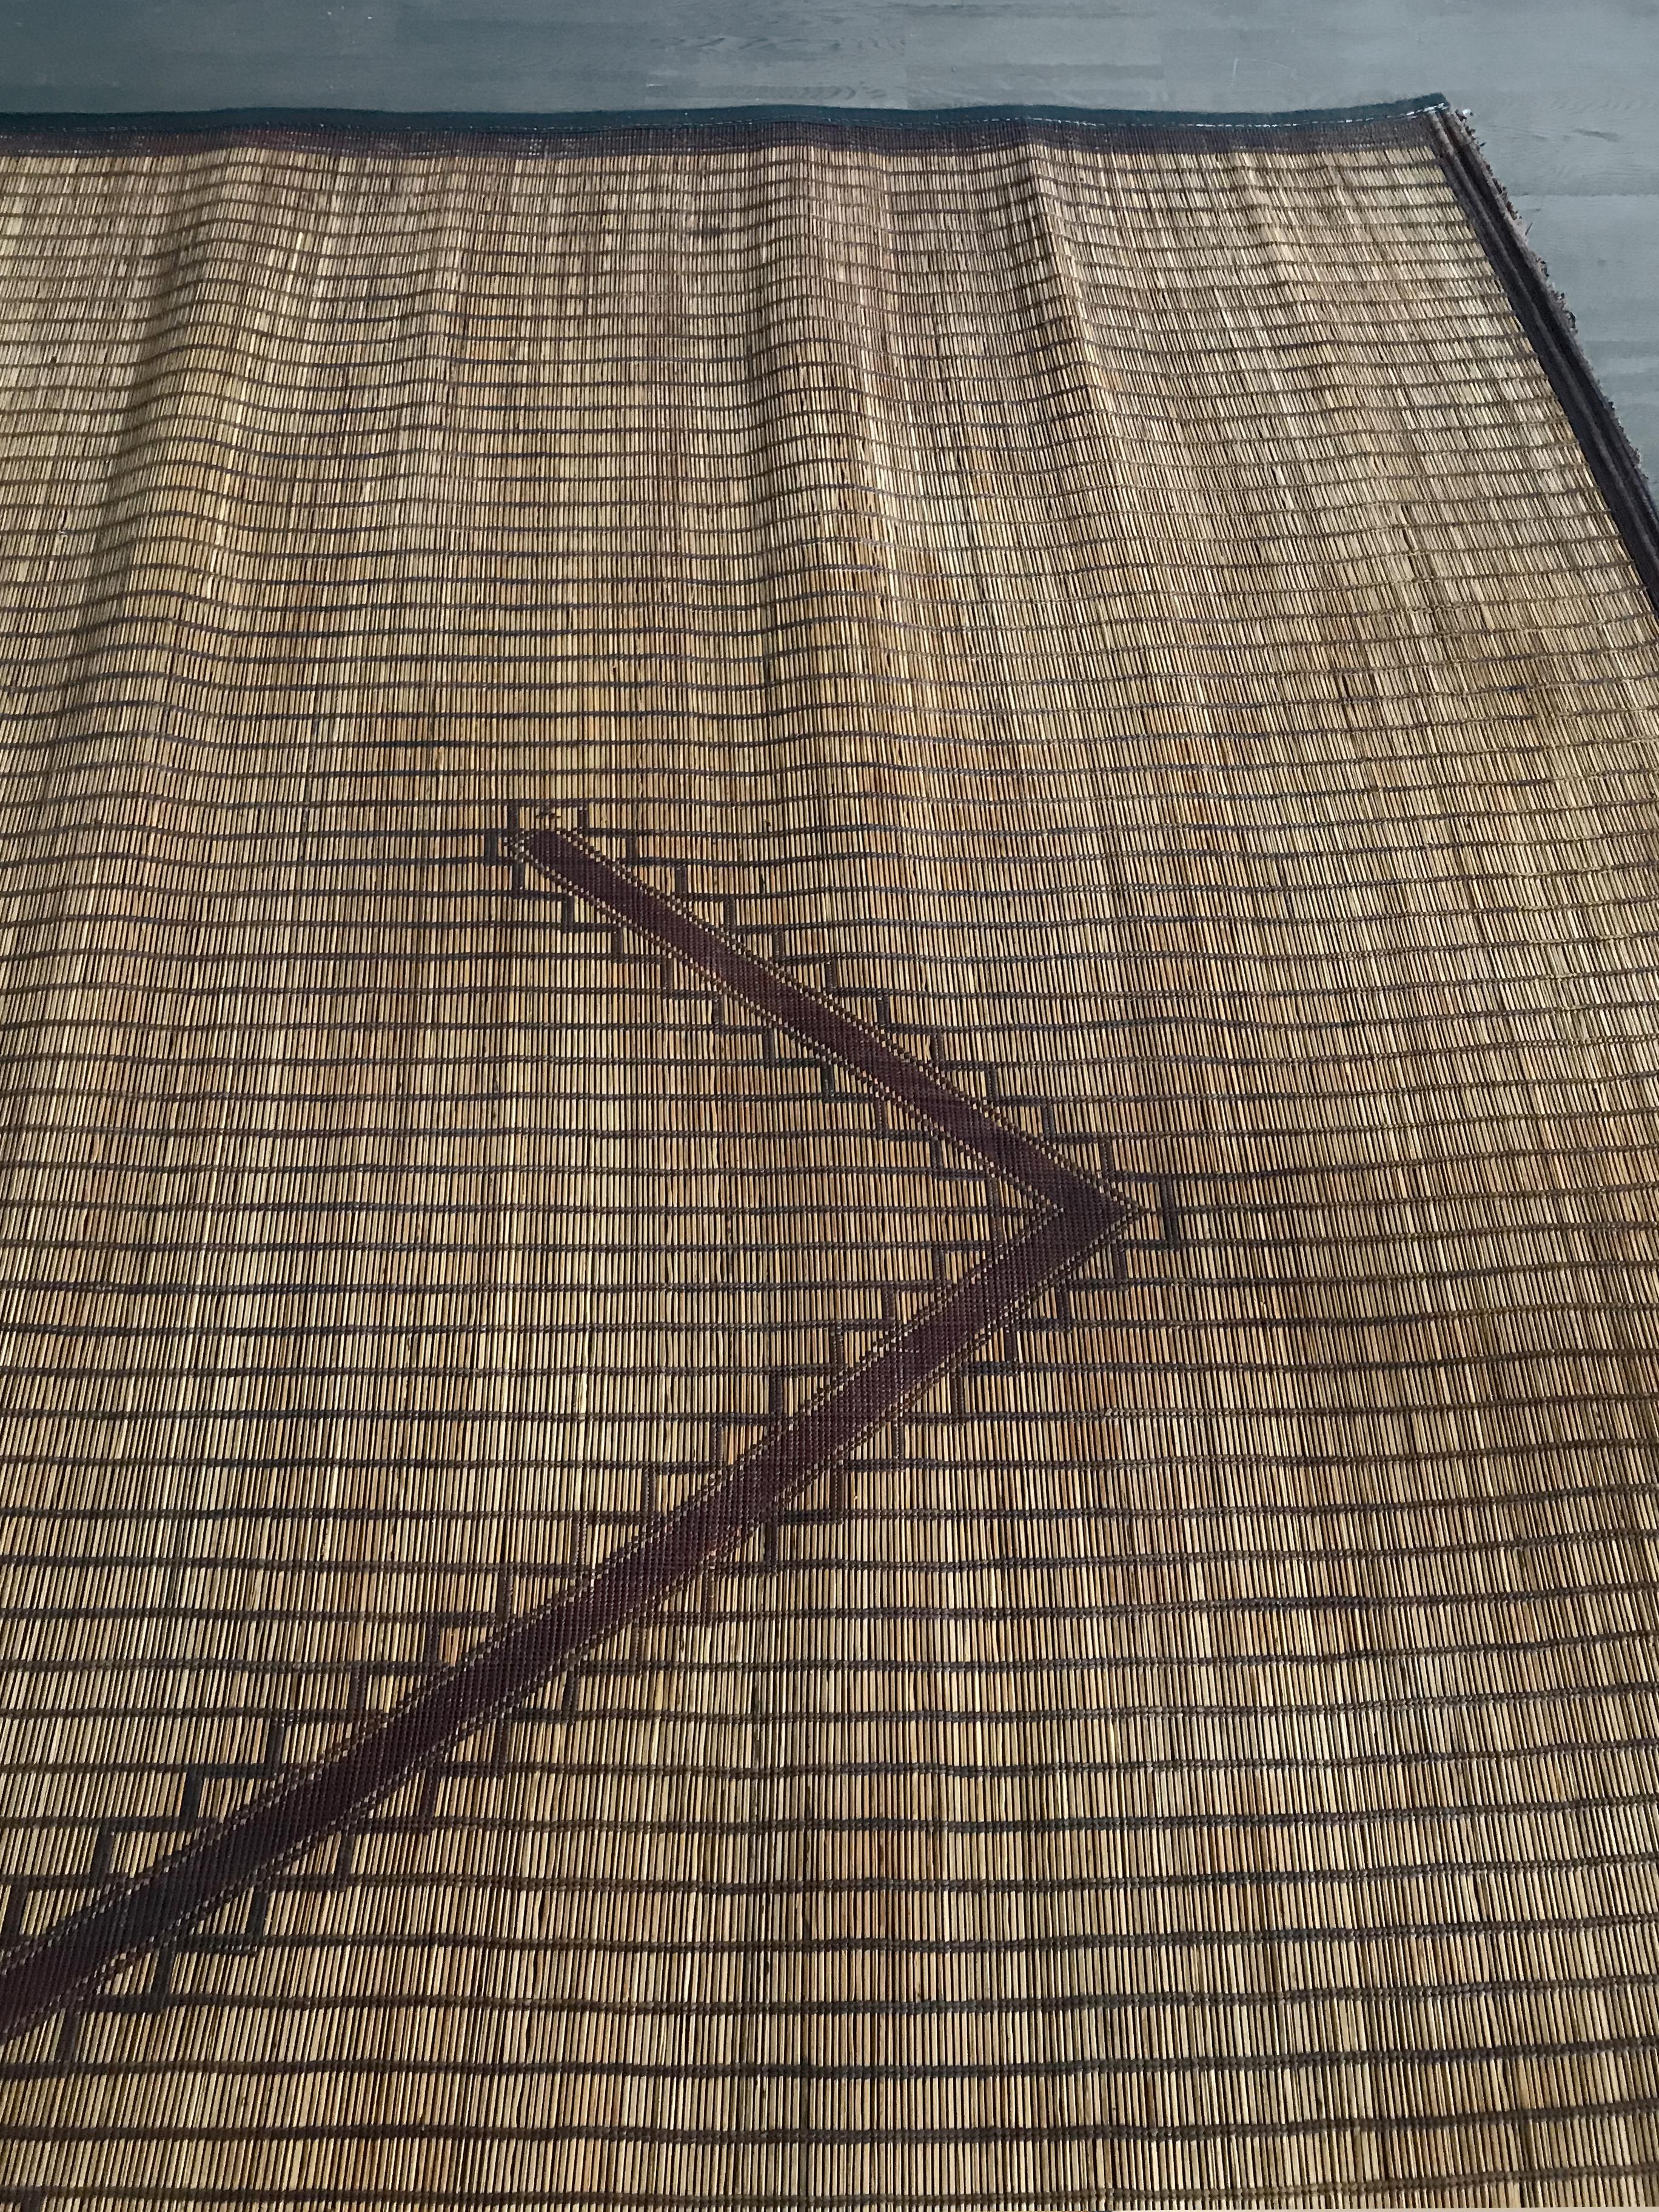 Mat from Mauritania Sahara in Leather and Palmwood, Mid-Century Modern Design 1